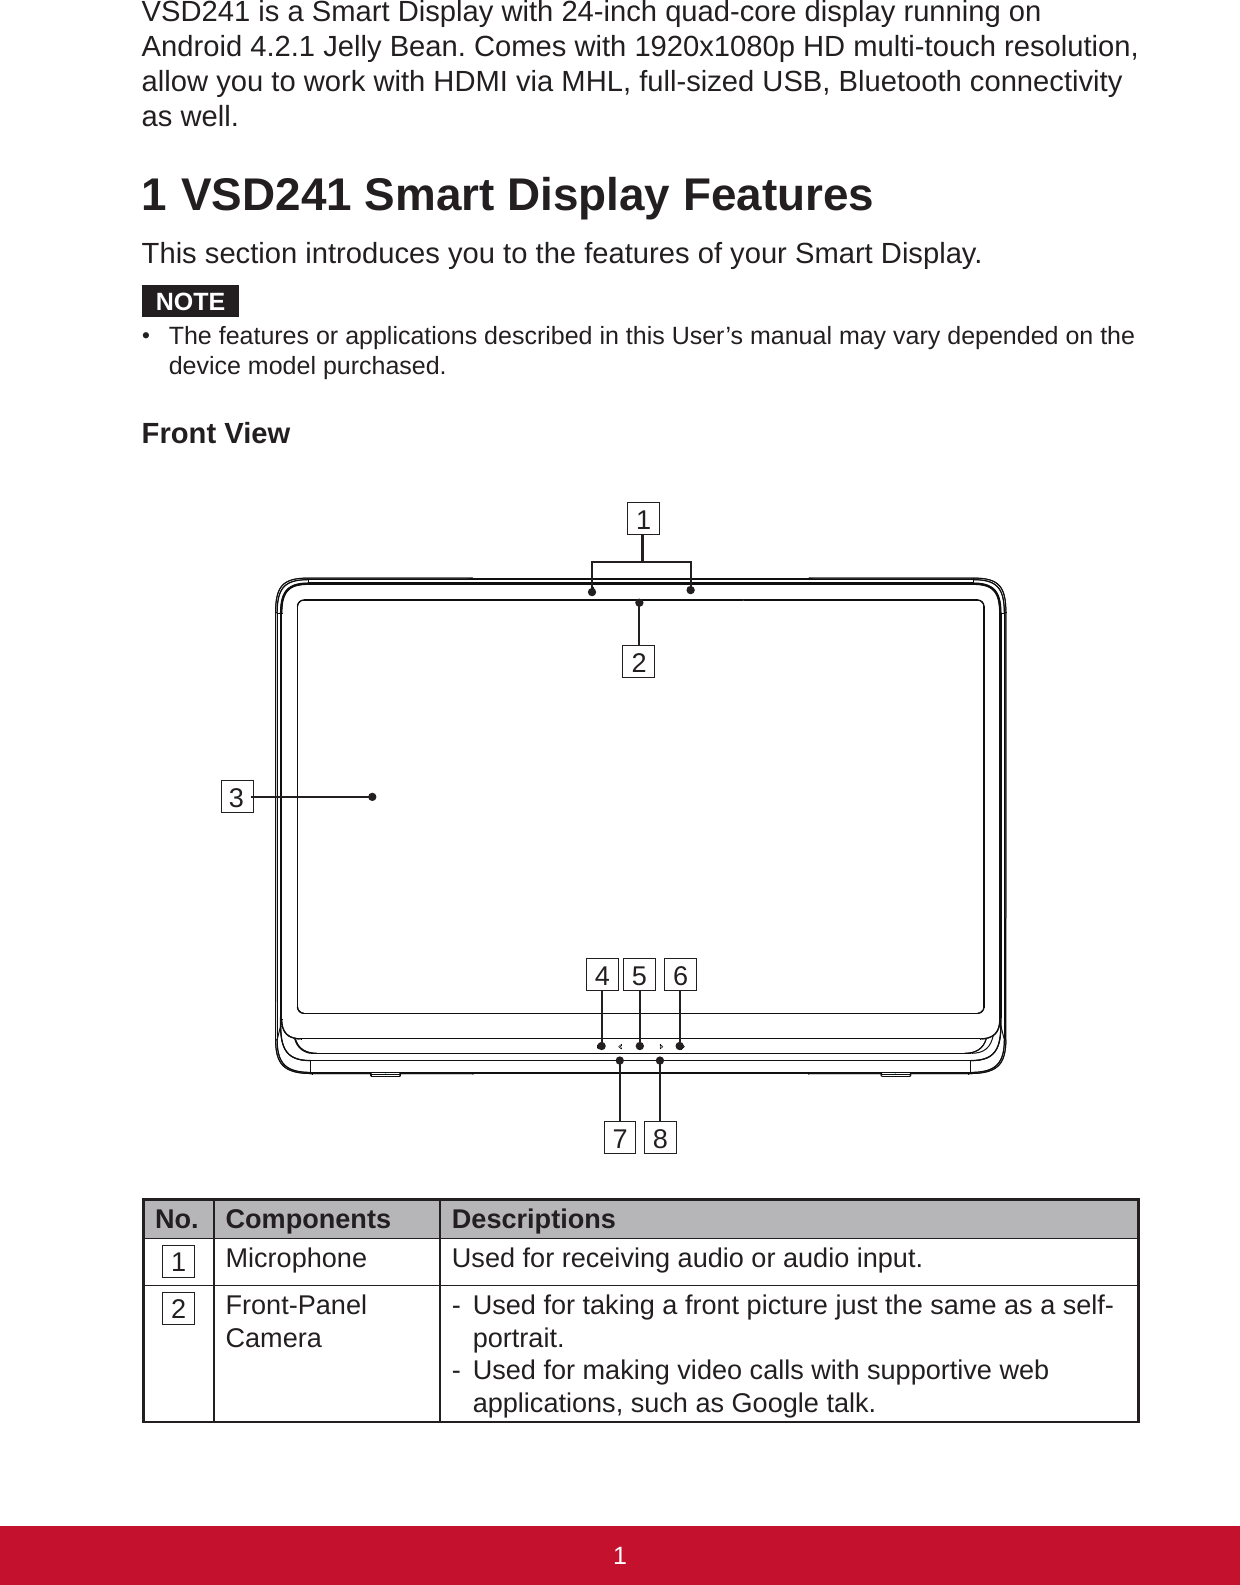 1x 1xVSD241 is a Smart Display with 24-inch quad-core display running on Android 4.2.1 Jelly Bean. Comes with 1920x1080p HD multi-touch resolution, allow you to work with HDMI via MHL, full-sized USB, Bluetooth connectivity as well. 1 VSD241 Smart Display FeaturesThis section introduces you to the features of your Smart Display.NOTE• The features or applications described in this User’s manual may vary depended on the device model purchased.Front ViewNo. Components  Descriptions1 Microphone Used for receiving audio or audio input.2 Front-Panel Camera -  Used for taking a front picture just the same as a self-portrait. -  Used for making video calls with supportive web applications, such as Google talk.14 5 67 823